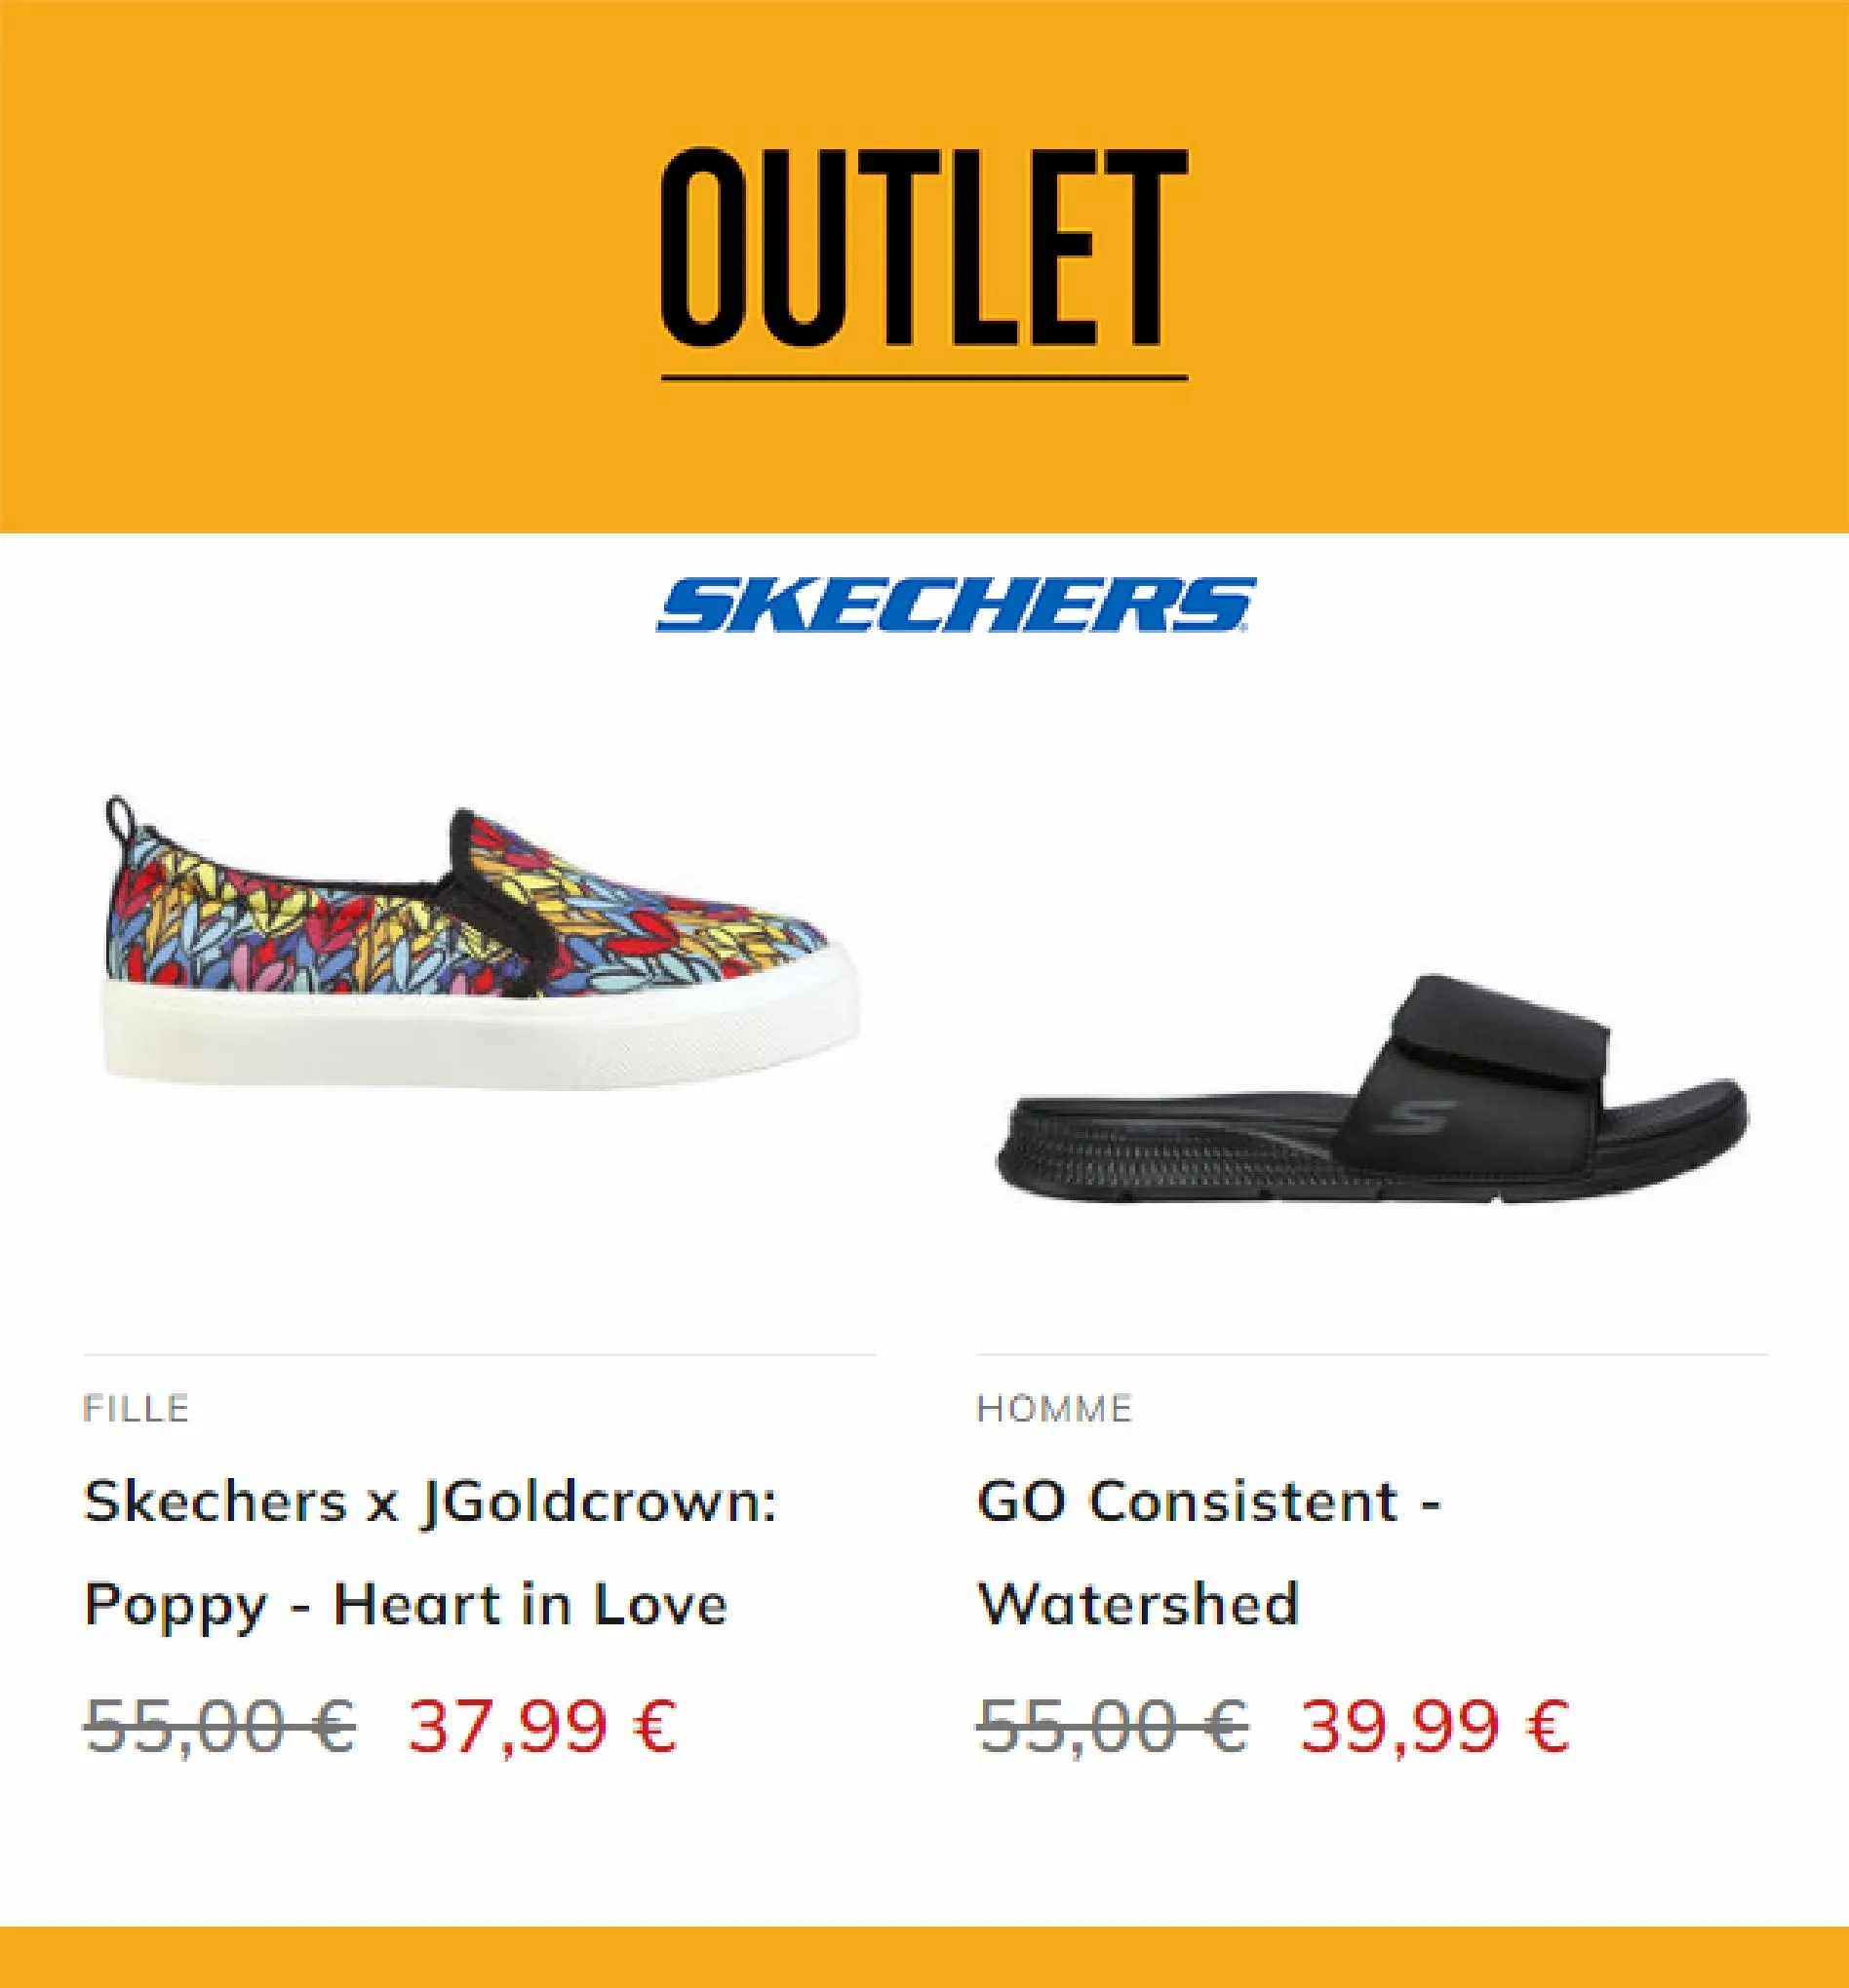 Catalogue Outlet Sketchers, page 00001